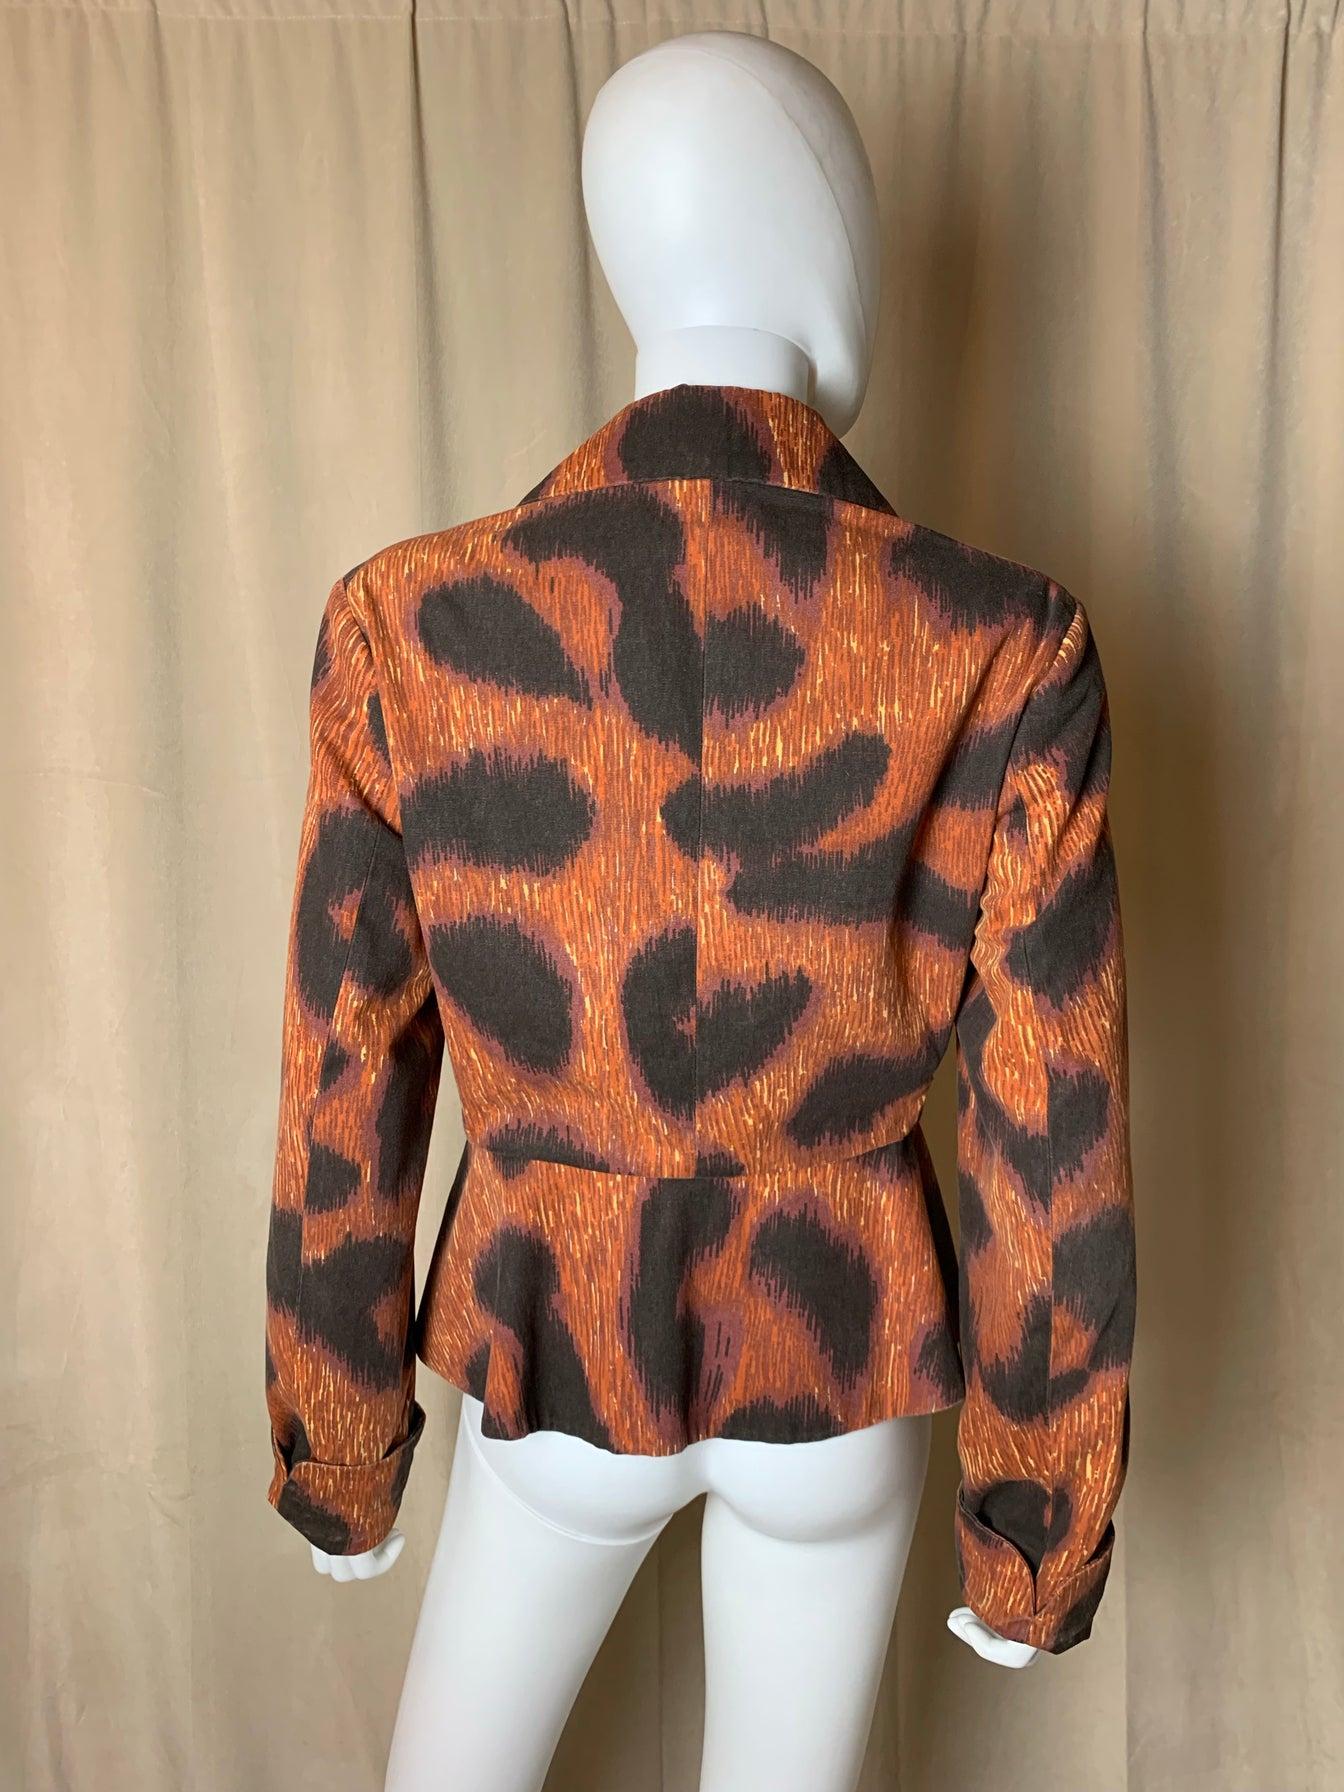 This gorgeous leopard jacket is from one of Vivienne Westwood’s most iconic runways. It occurred in October 1993, for the Fall/Winter 1994 collection. Leopard print was the theme of the runway, as the carpet of the runway was leopard print as well.